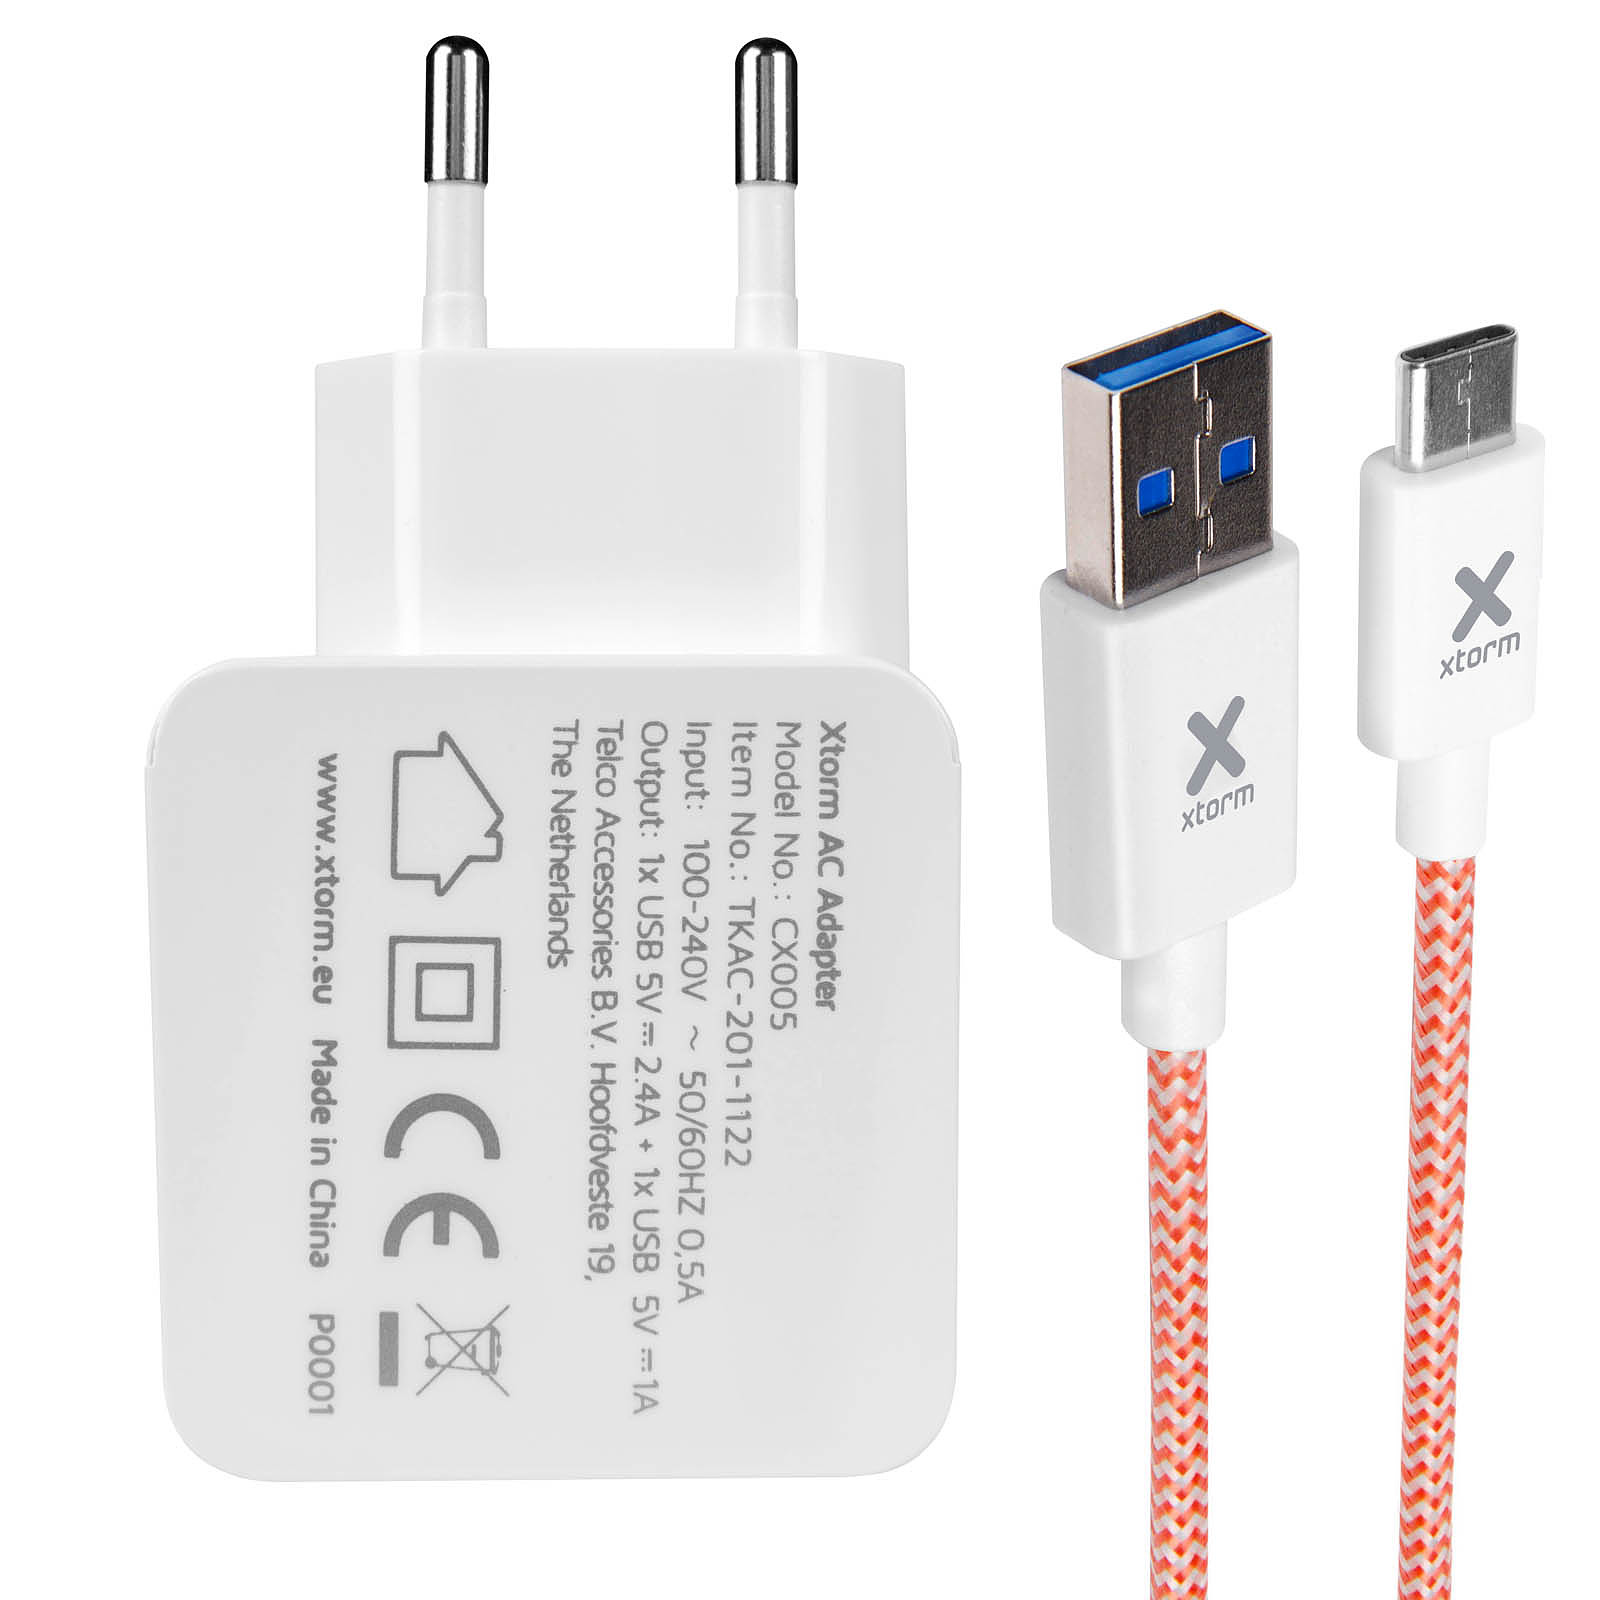 Xtorm Chargeur mural 2x Ports USB 1A et 2.4A et Cable USB Type C Blanc - Chargeur telephone Xtorm